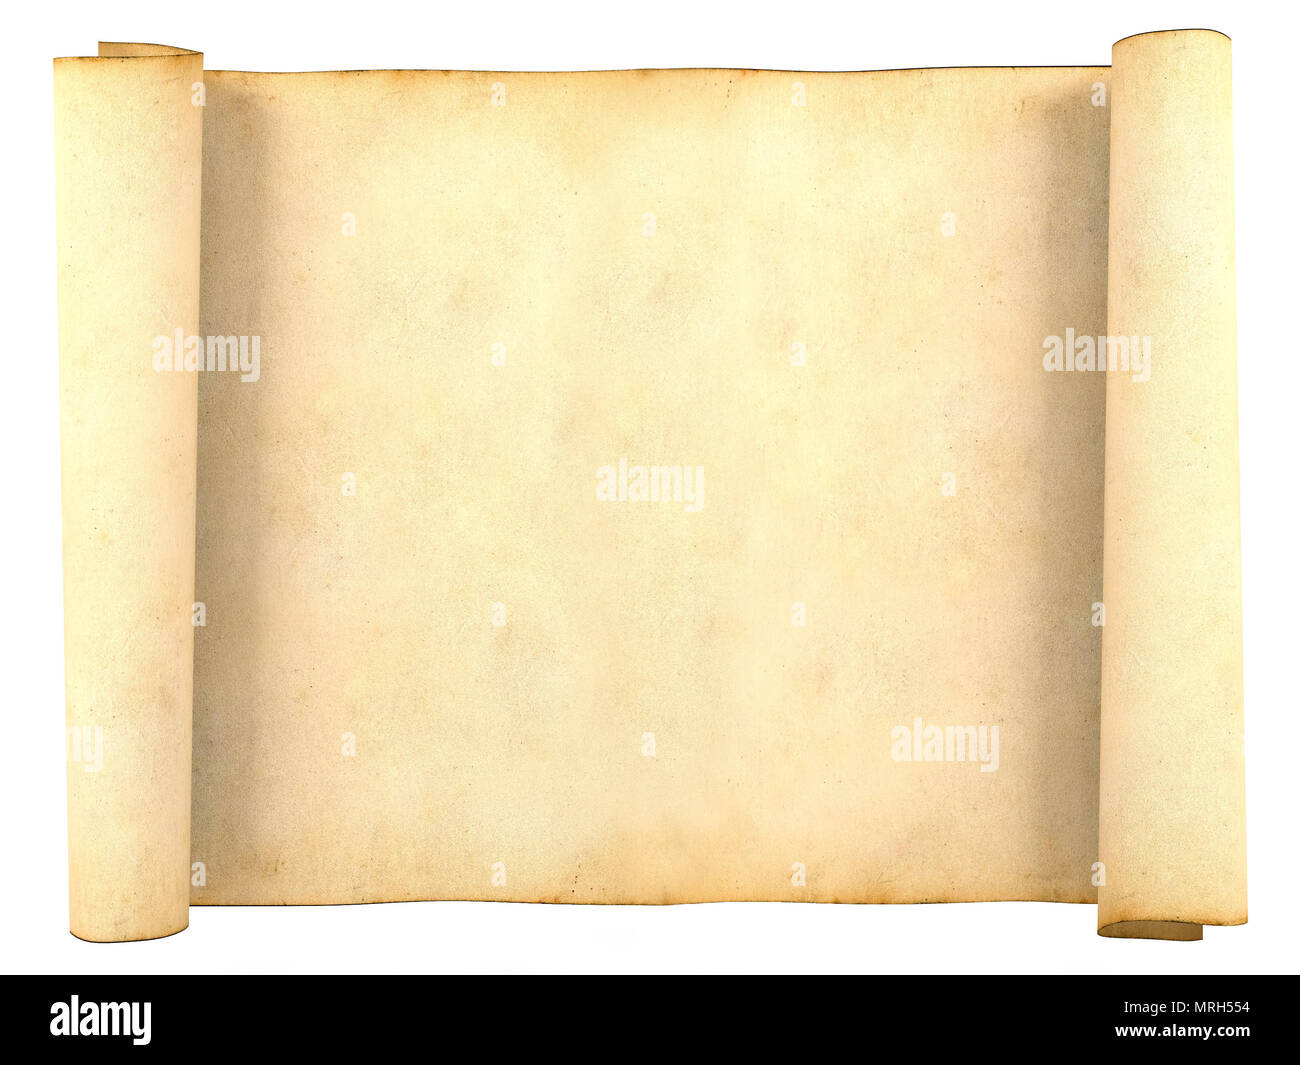 Premium Photo  Old blank antique scroll paper isolated on white